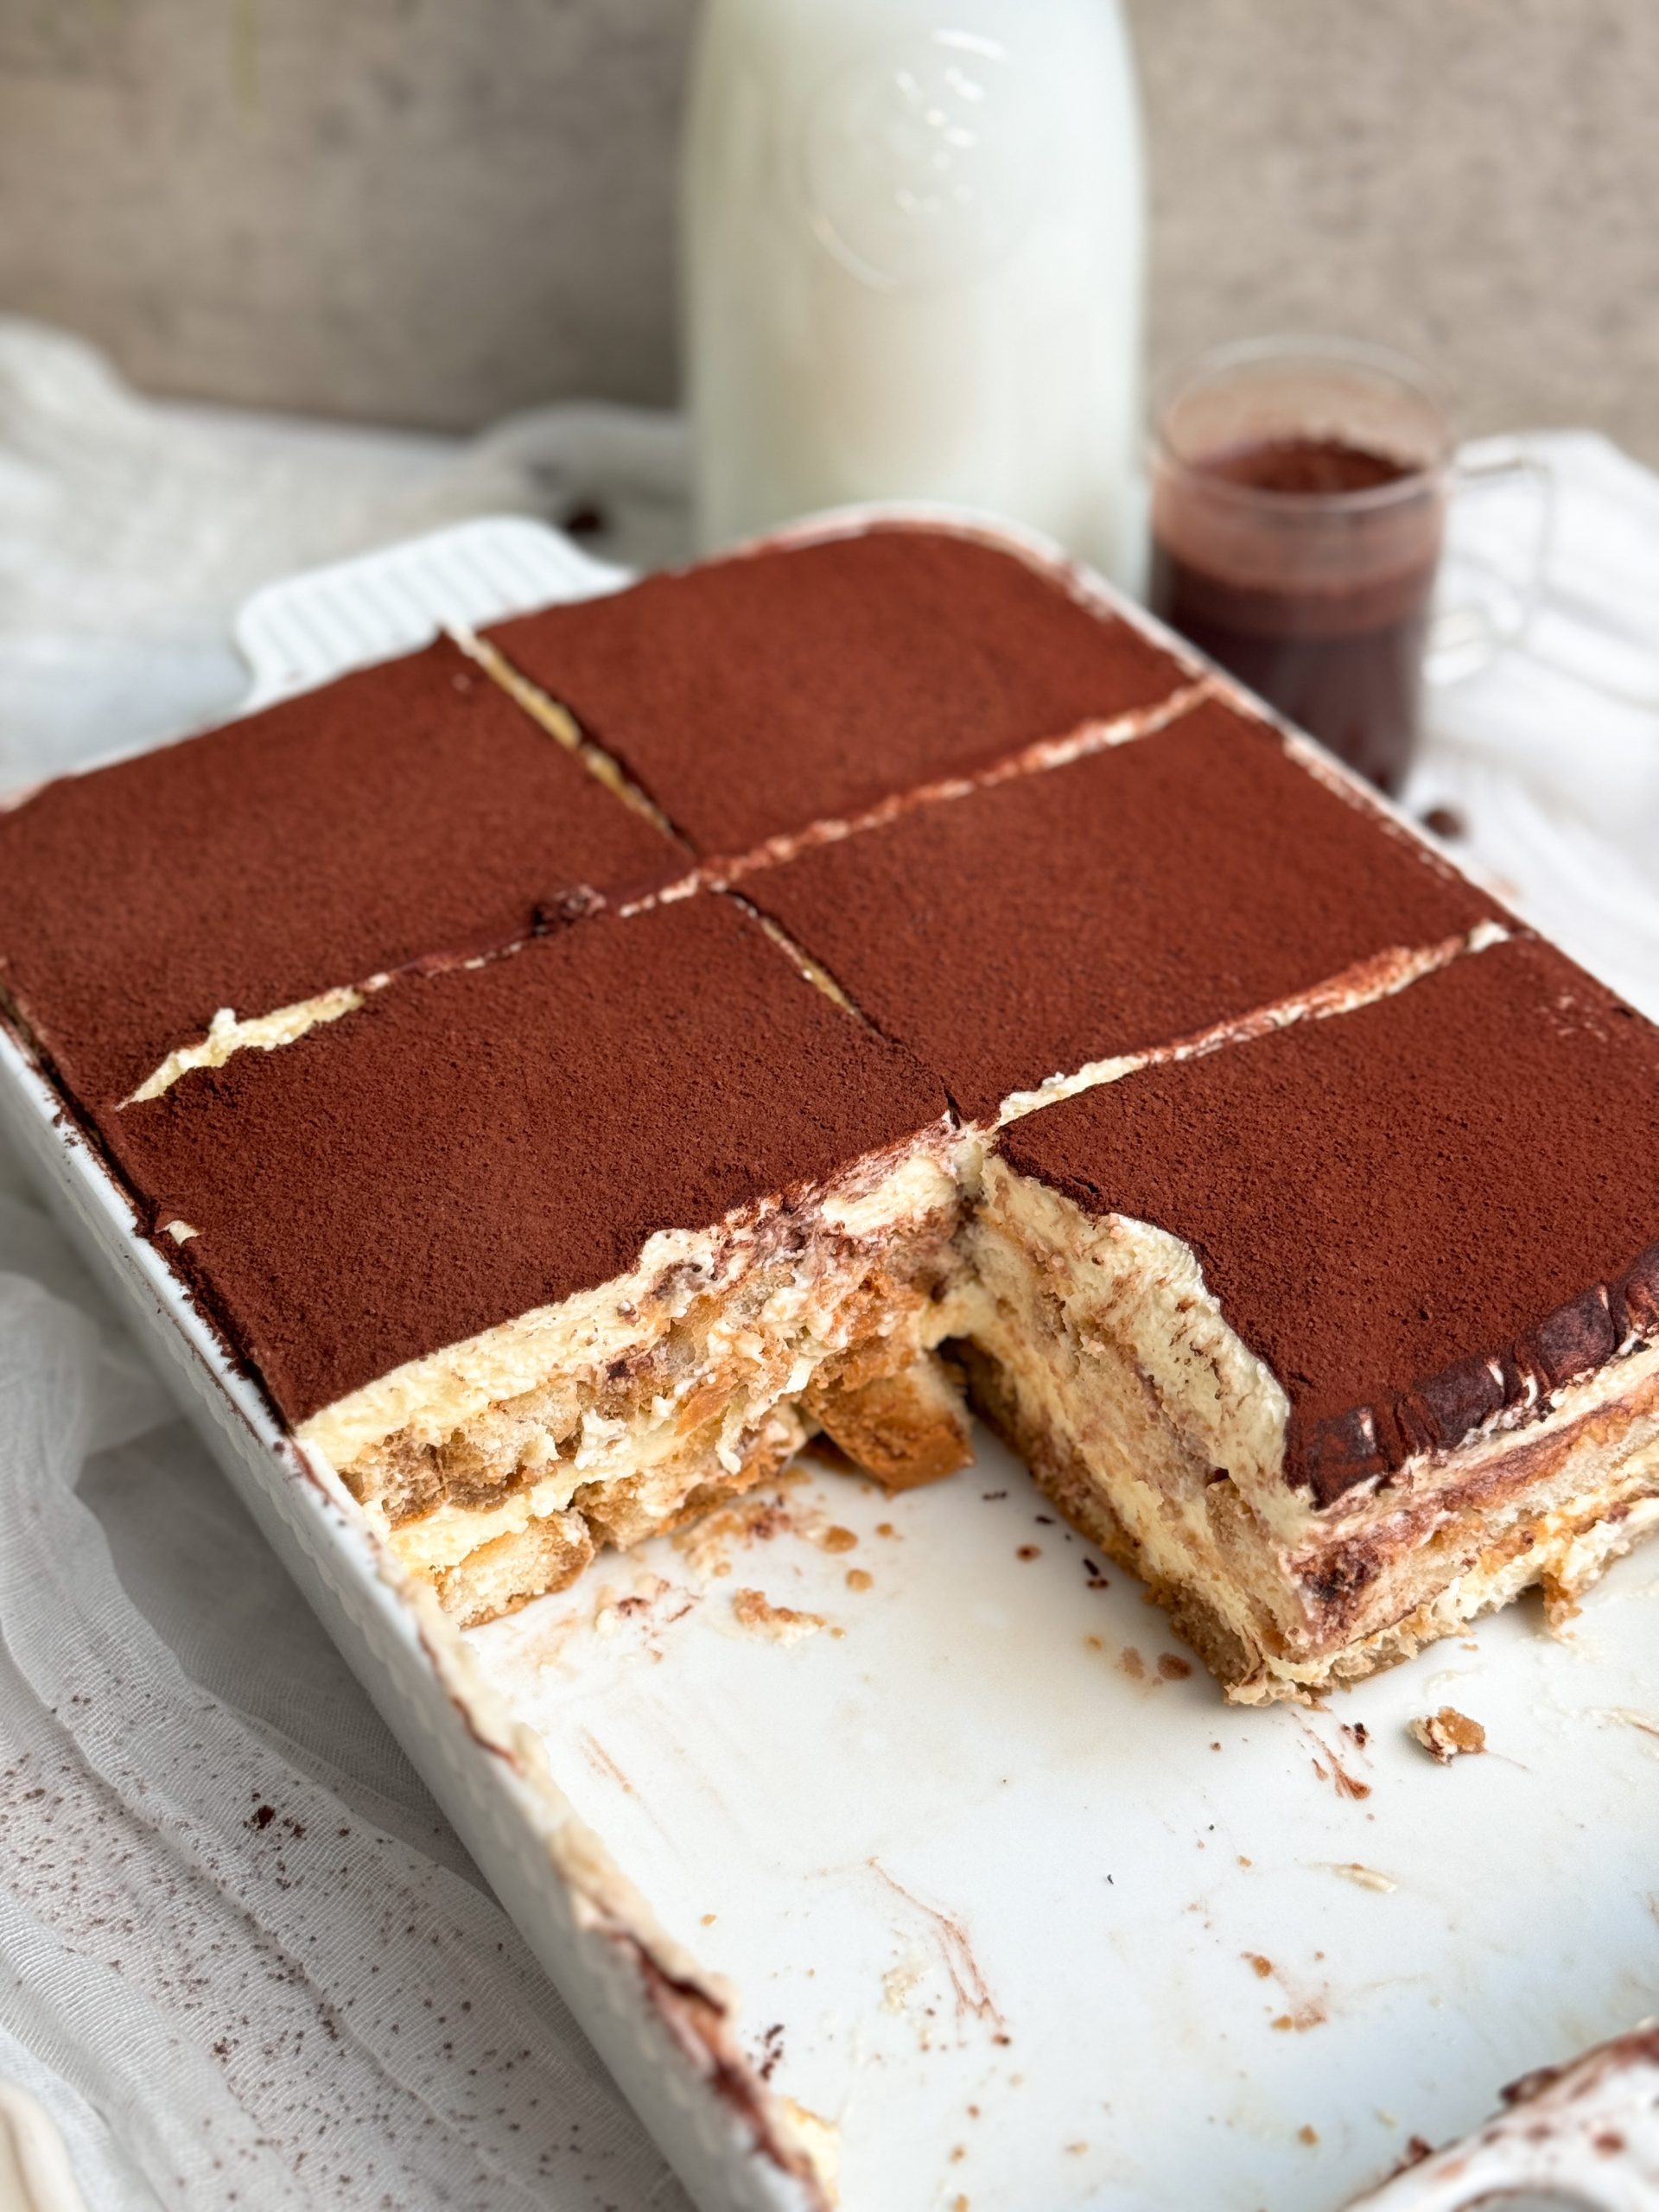 tiramisu in a white pan, cut into slices, with a slice taken out to show the layers of ladyfingers and mascarpone cream